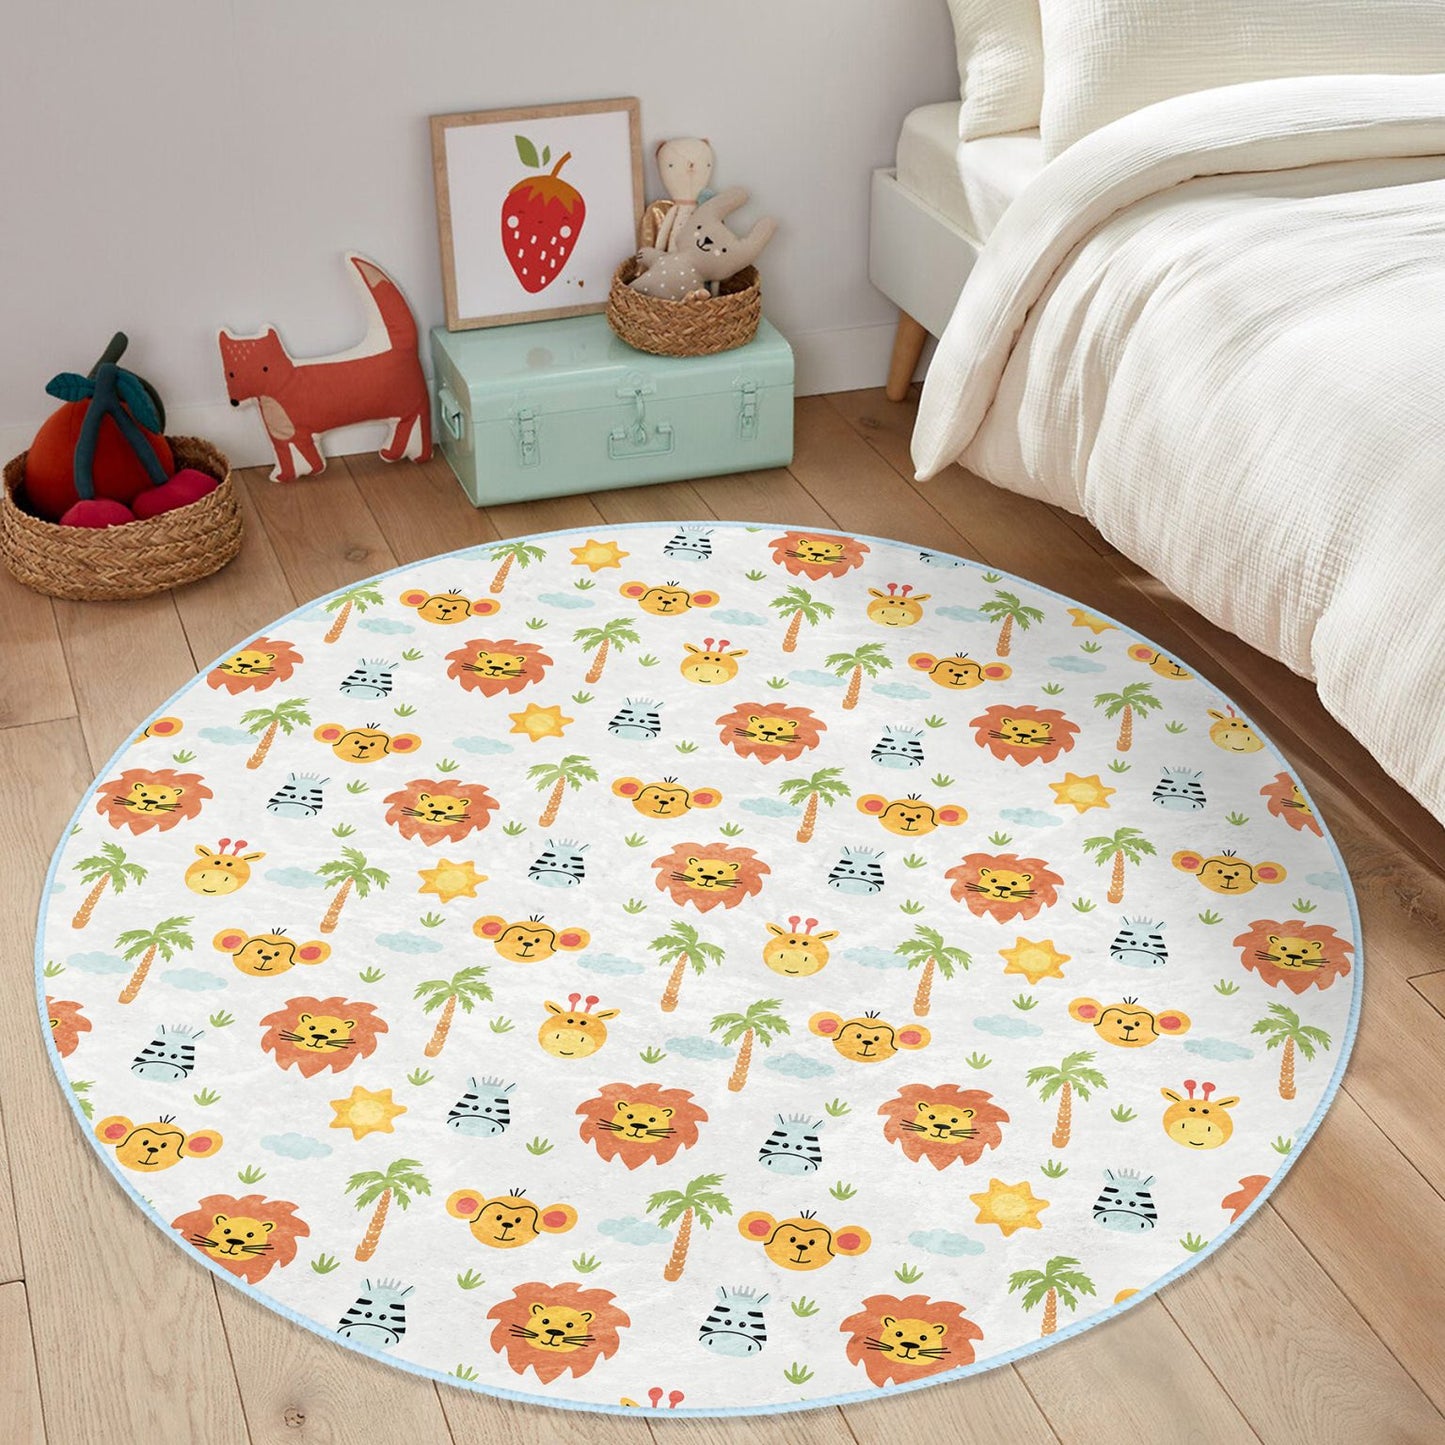 Homeezone's Lion and Monkey Friend Kids Room Floor Covering